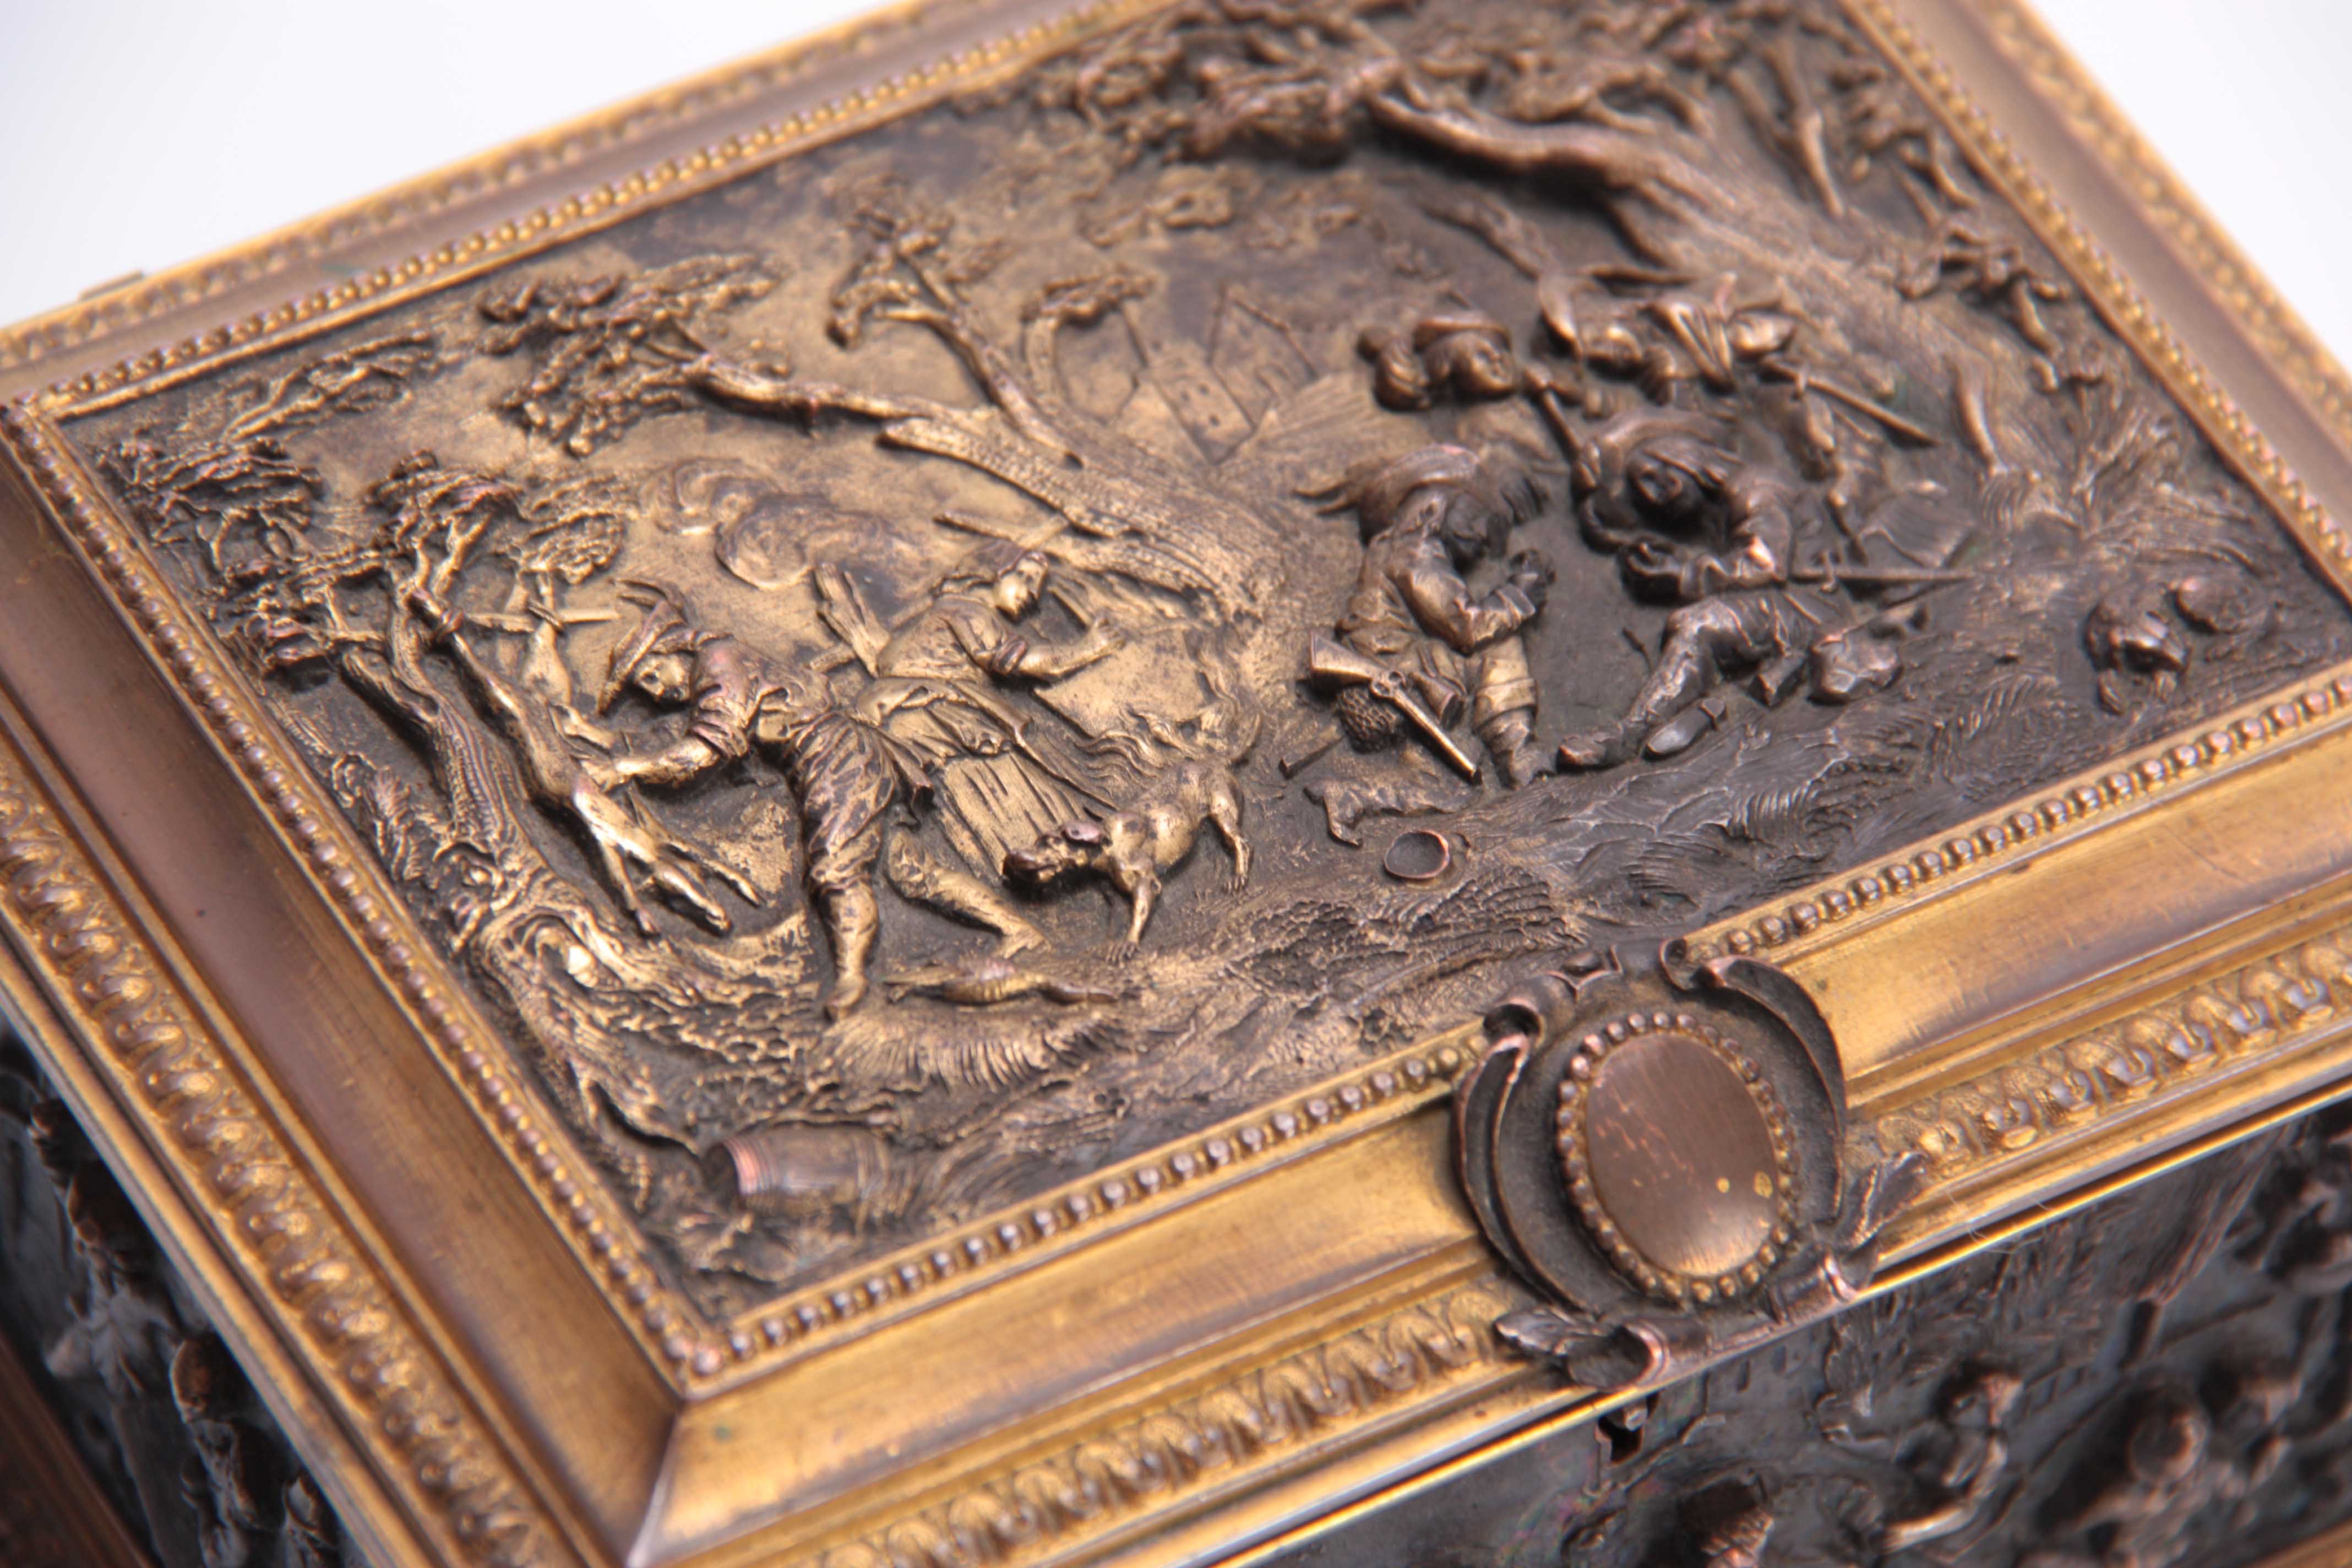 A LATE 19TH CENTURY CONTINENTAL GILT BRASS JEWELLERY CASKET set with cast bronzed figural panels - Image 2 of 9